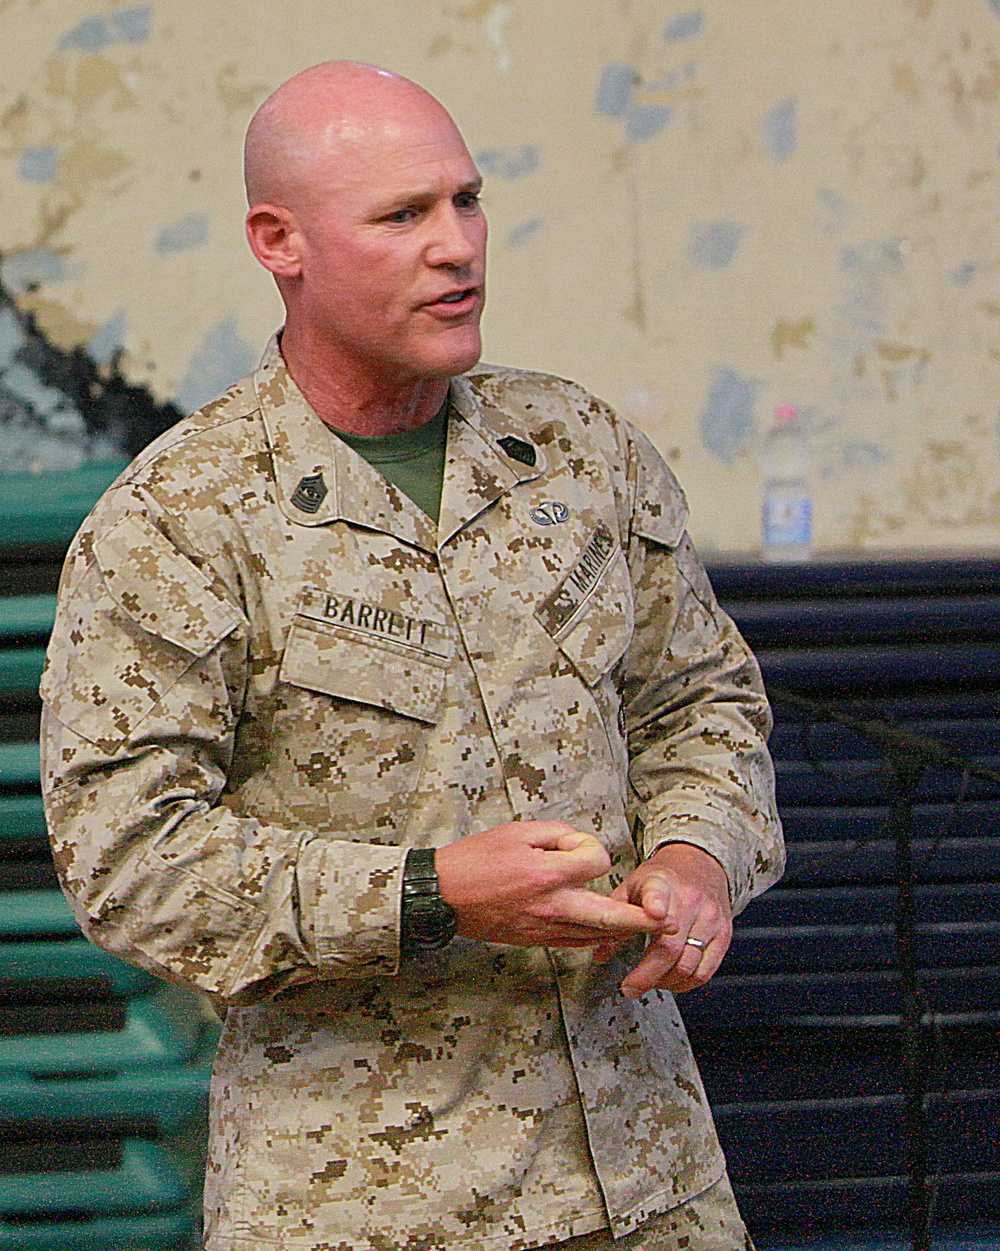 Commandant and sergeant major of the Marine Corps visit Marines and sailors of Special-Purpose Marine Air-Ground Task Force Africa